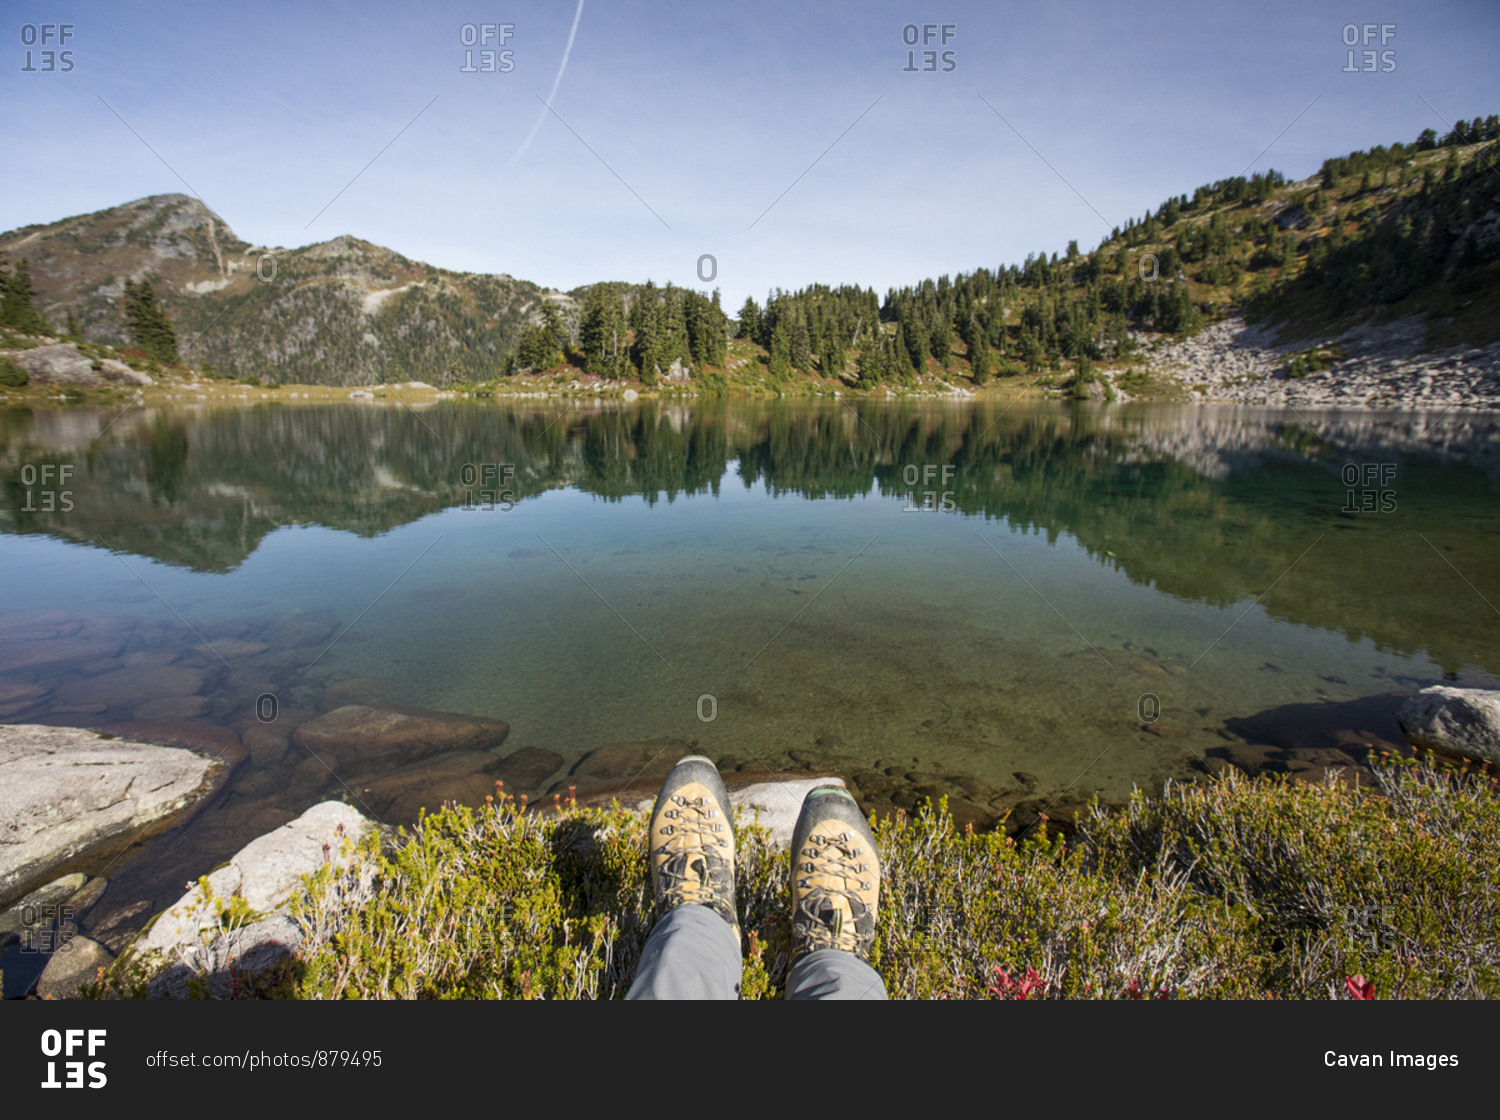 Mountaineering boots in front of picturesque alpine tarn, B.C.